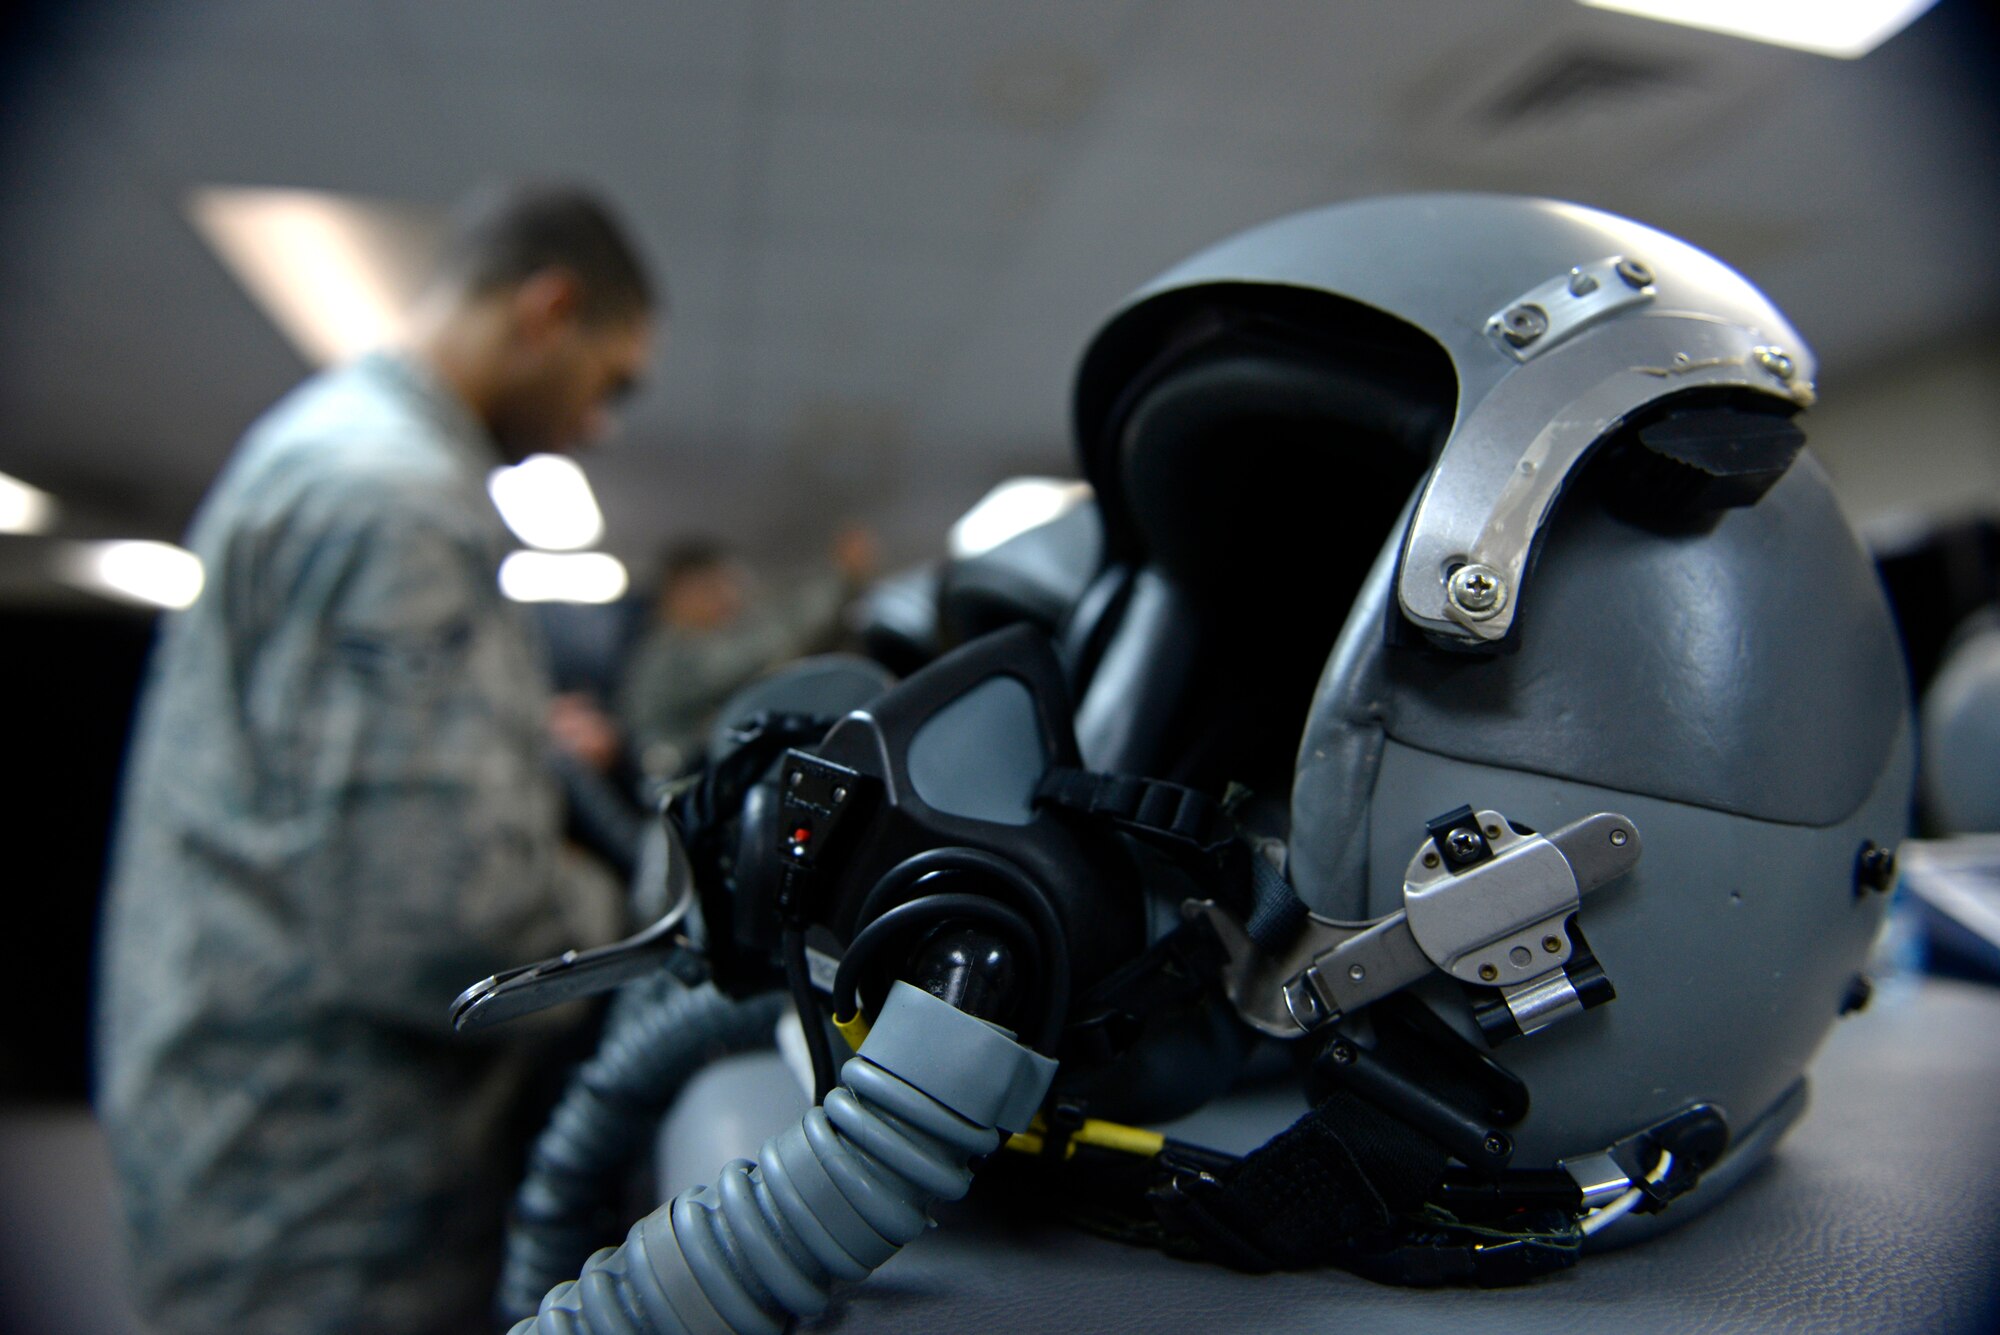 Airman 1st Class Michael Banks, 20th Expeditionary Bomb Squadron aircrew flight equipment specialist, disinfects B-52 Stratofortress aircrew helmets Aug. 12, 2015, at Andersen Air Force Base, Guam. After every flight AFE technicians clean and maintain essential life support equipment in preparation for the next mission. (U.S. Air Force photo by Staff Sgt. Alexander W. Riedel/Released)